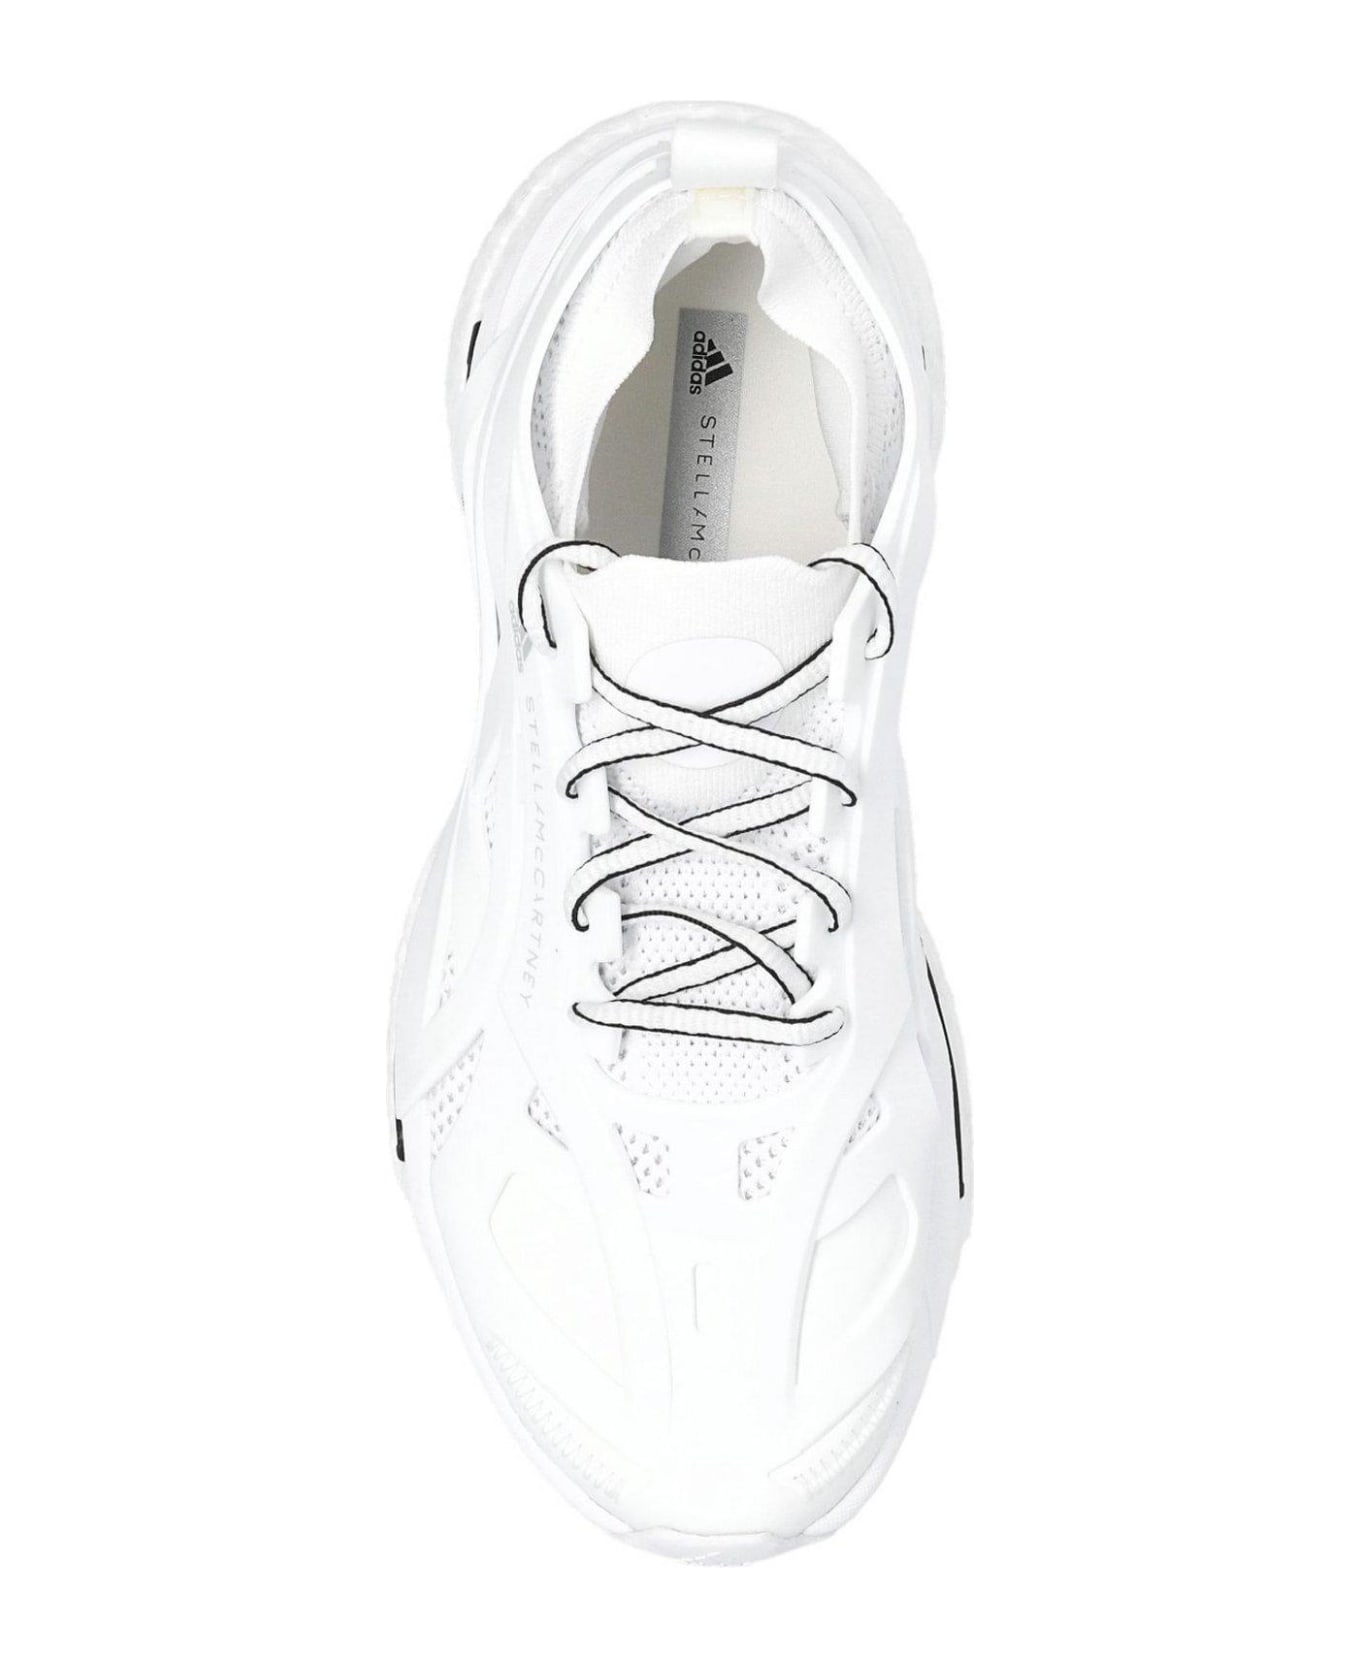 Adidas by Stella McCartney Solarglide Sneakers スニーカー